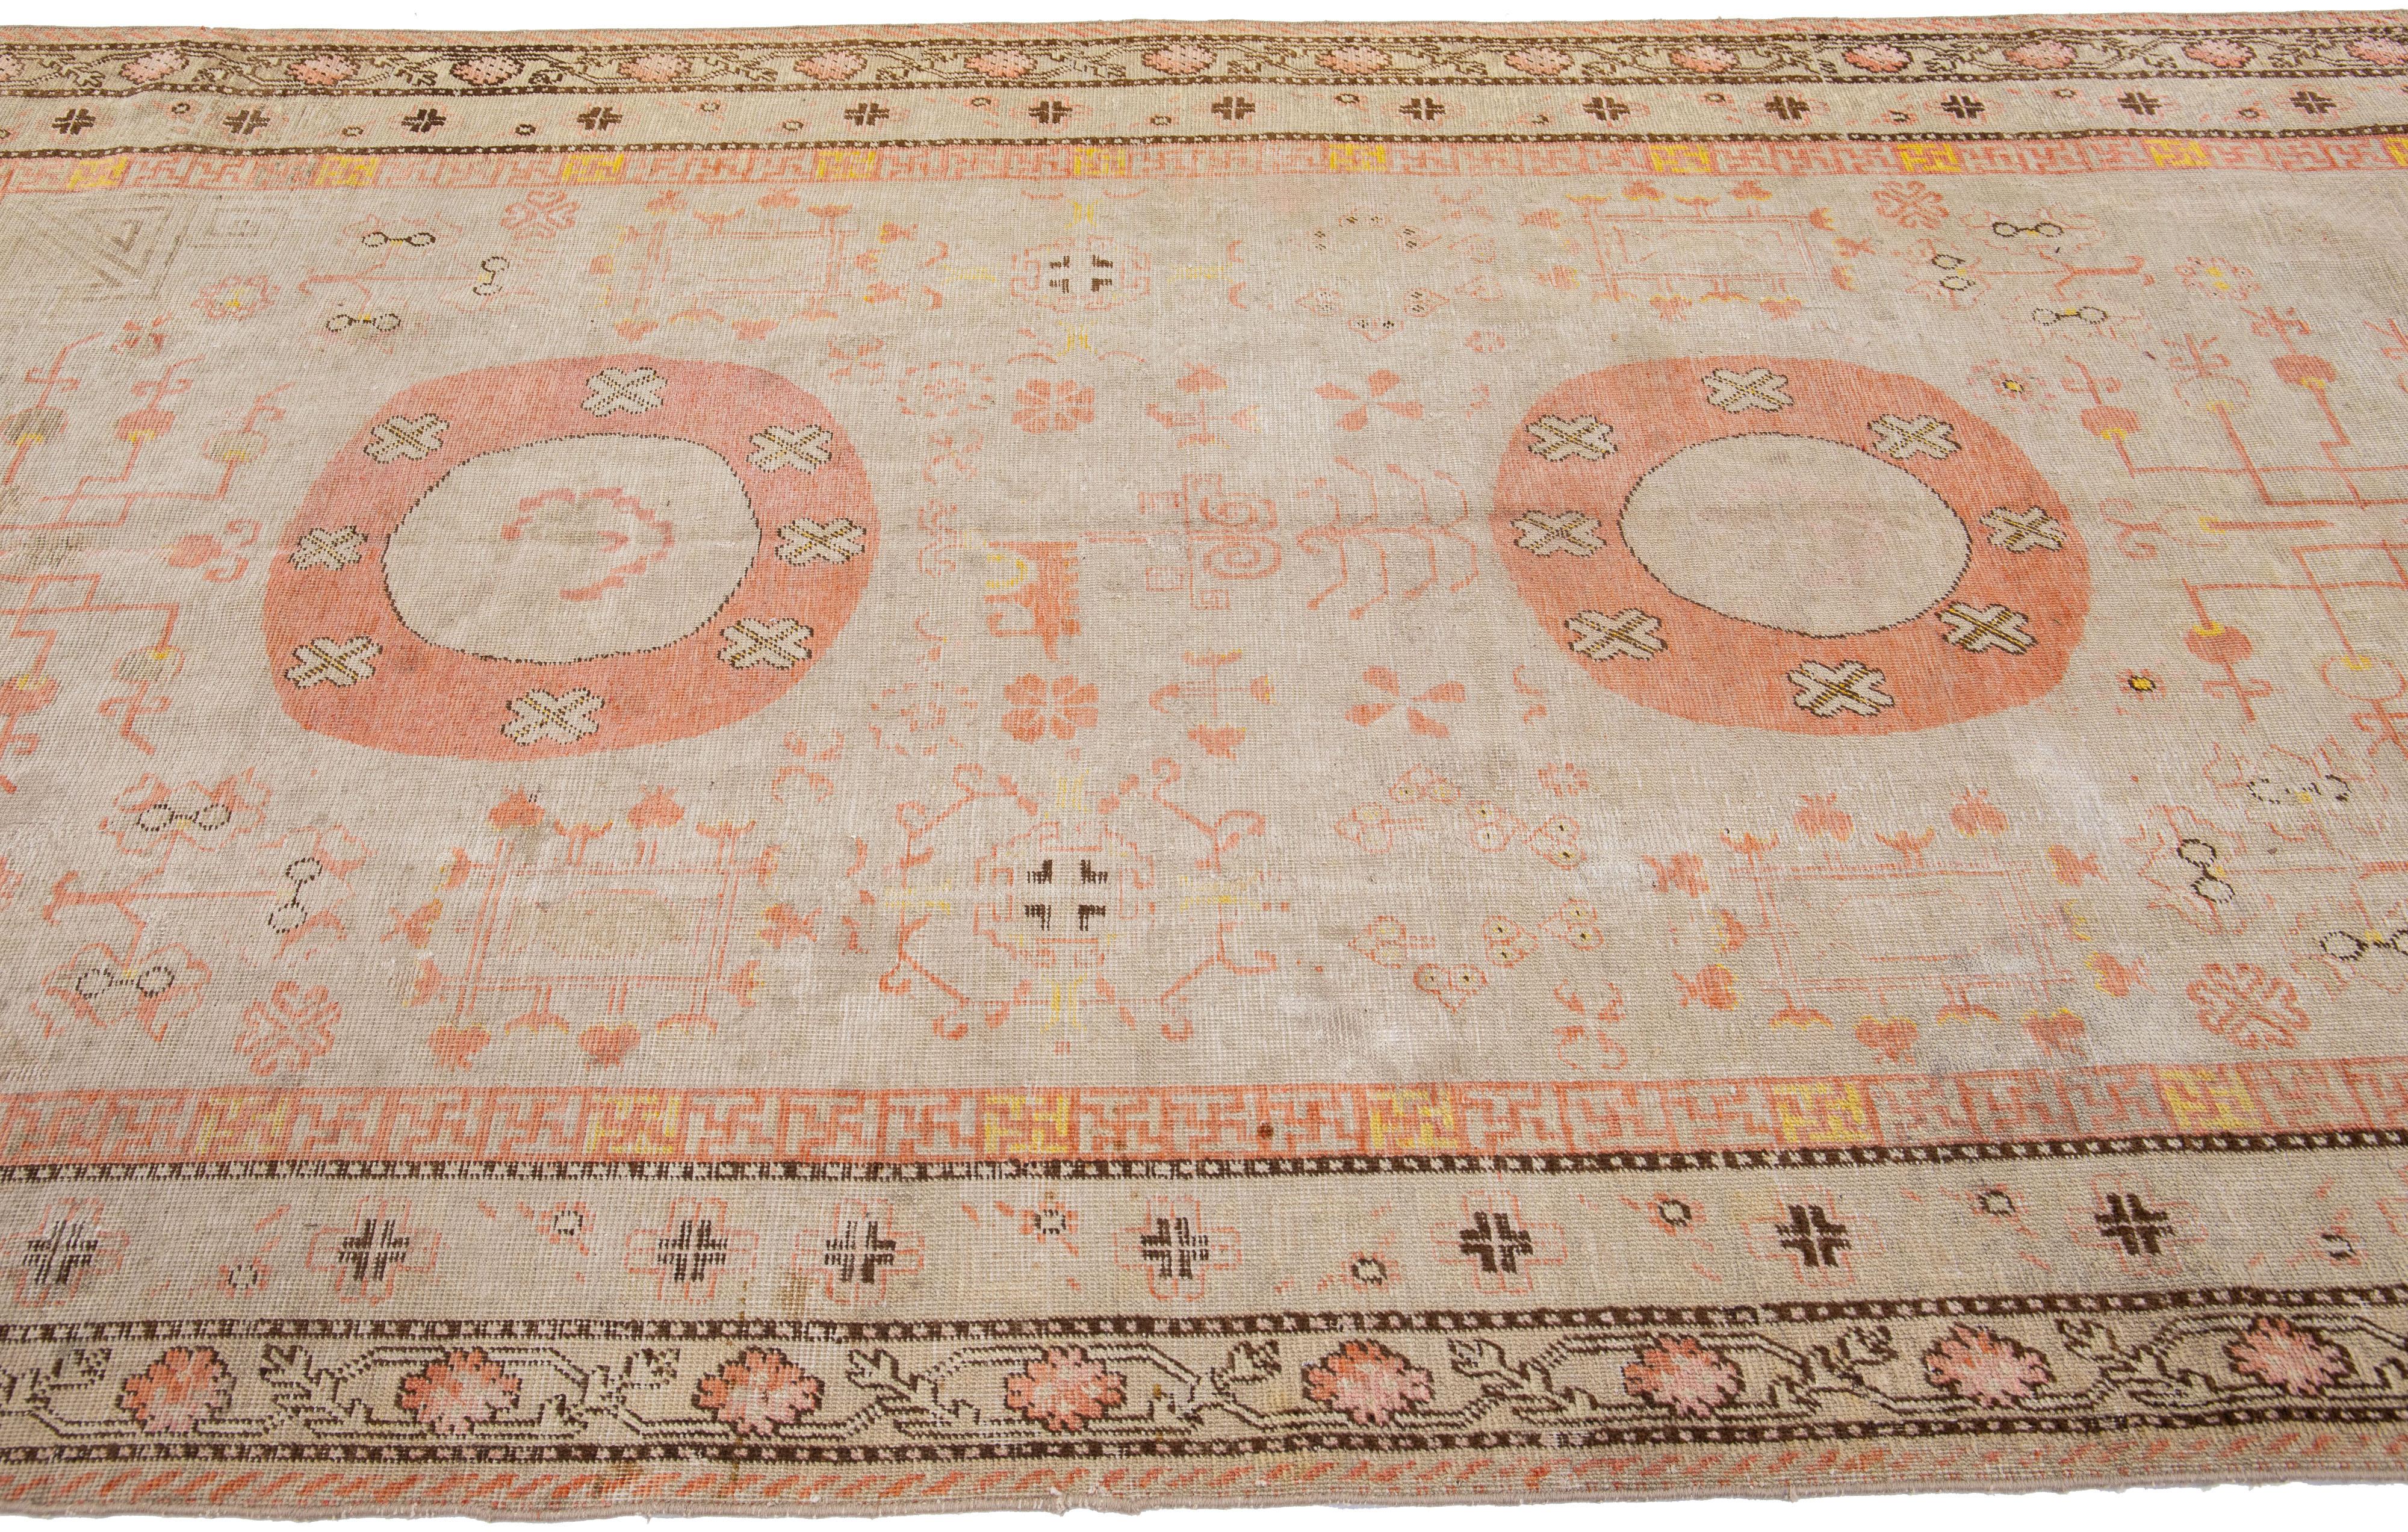 Antique Khotan Handmade Peach Persian Wool Rug With Allover Design In Good Condition For Sale In Norwalk, CT